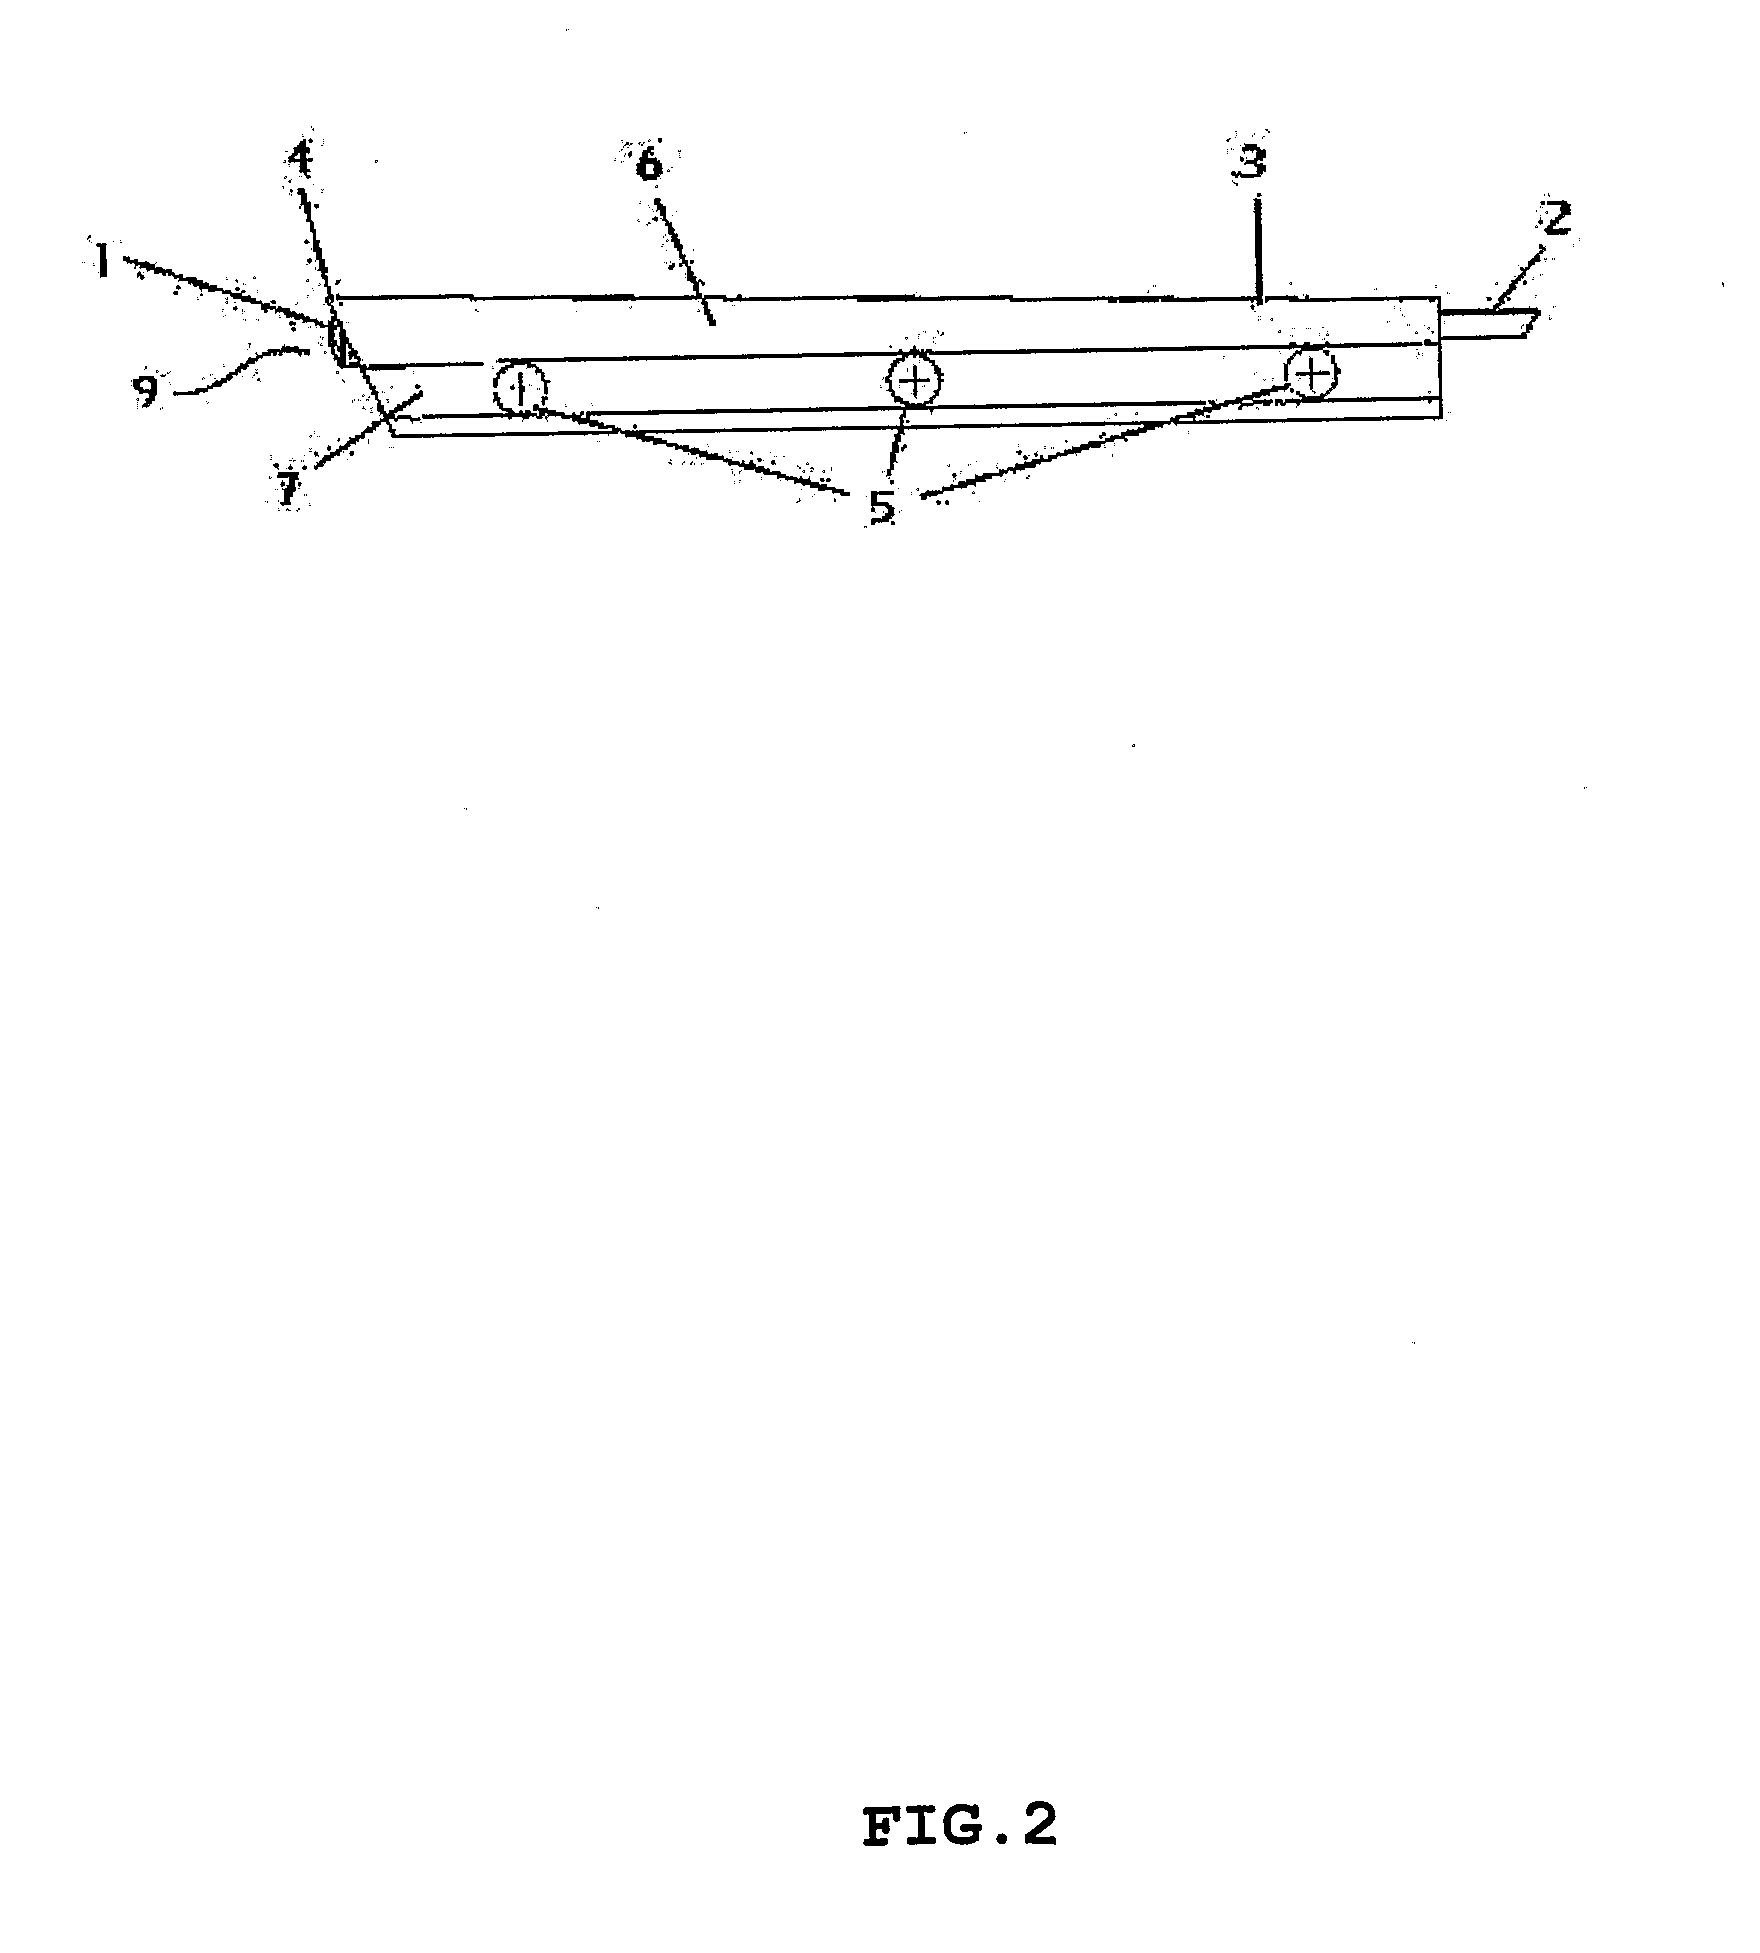 Attachable portable illumination apparatus for surgical instruments